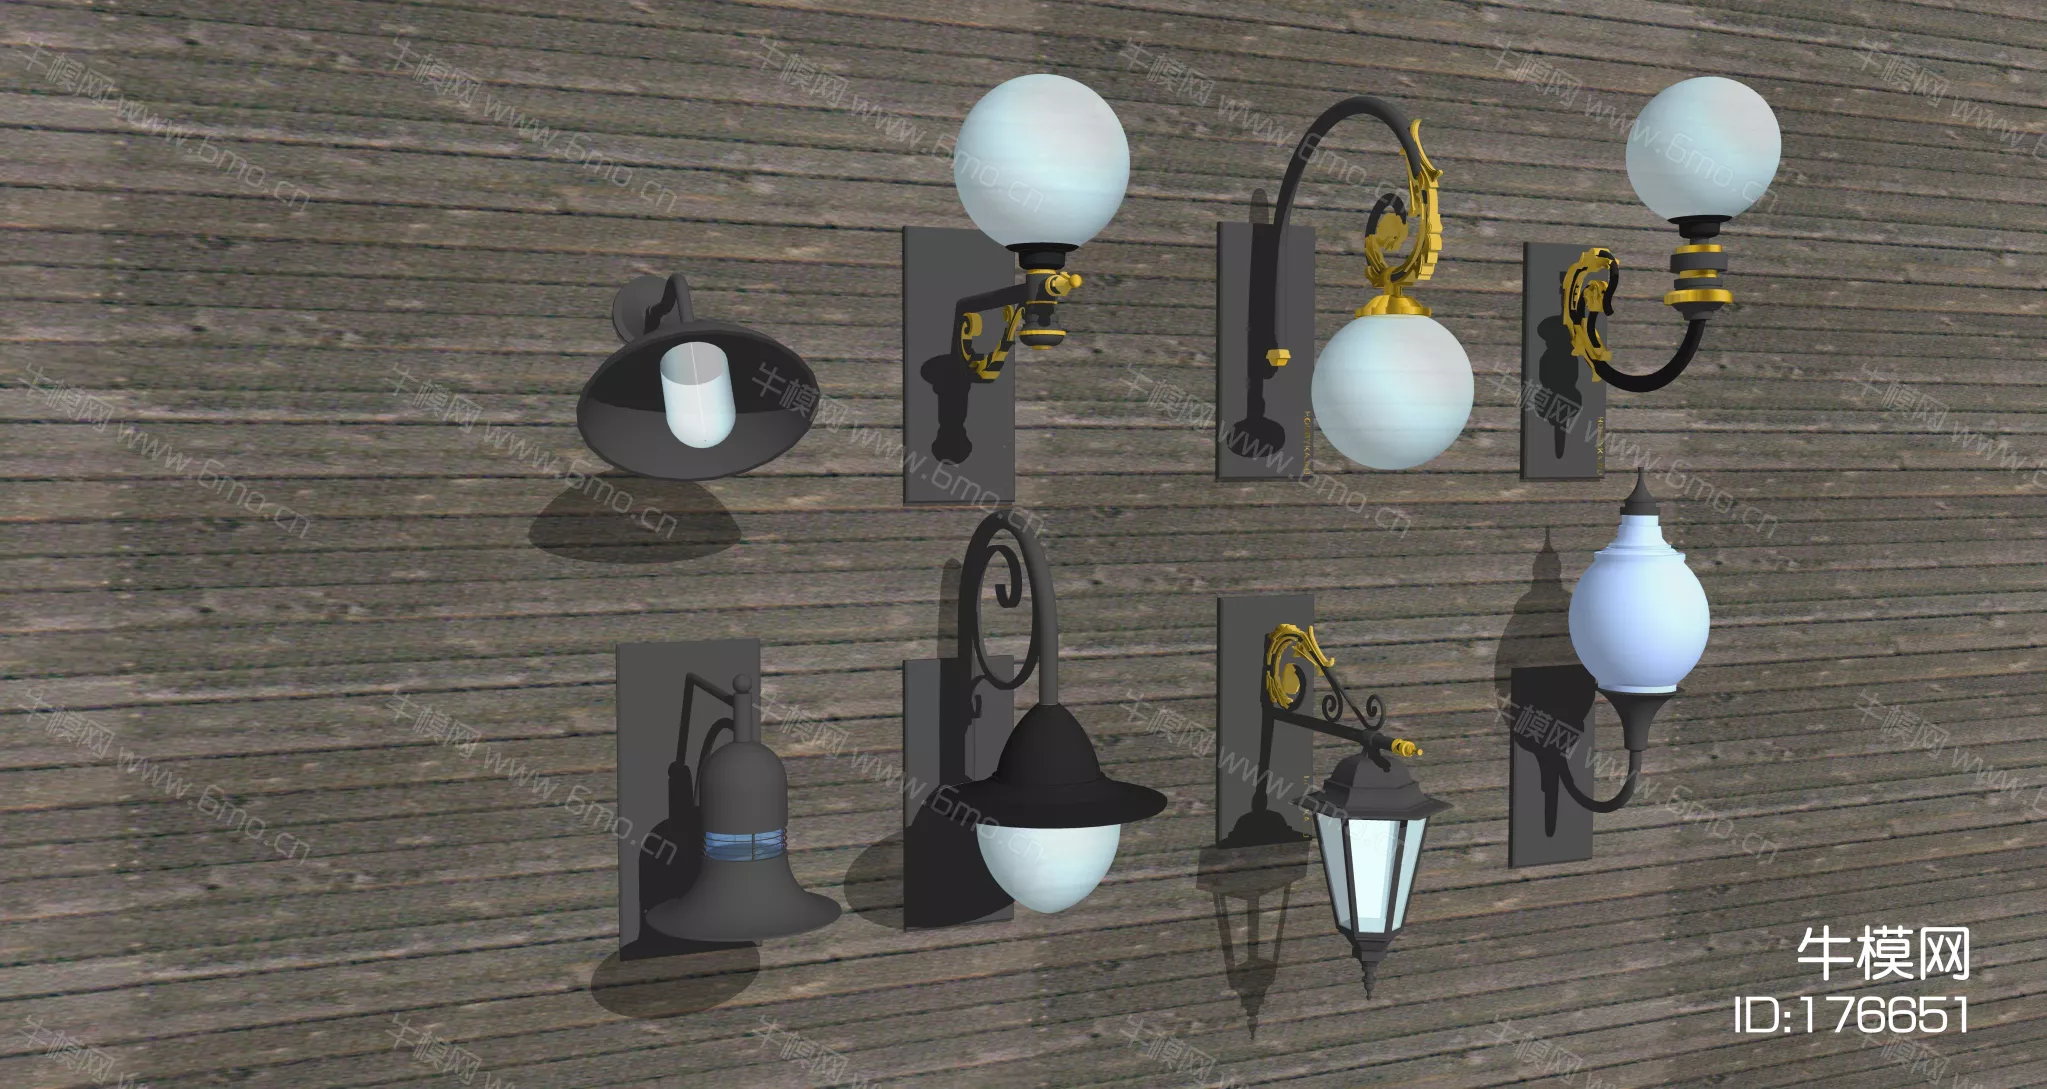 CHINESE WALL LAMP - SKETCHUP 3D MODEL - ENSCAPE - 176651